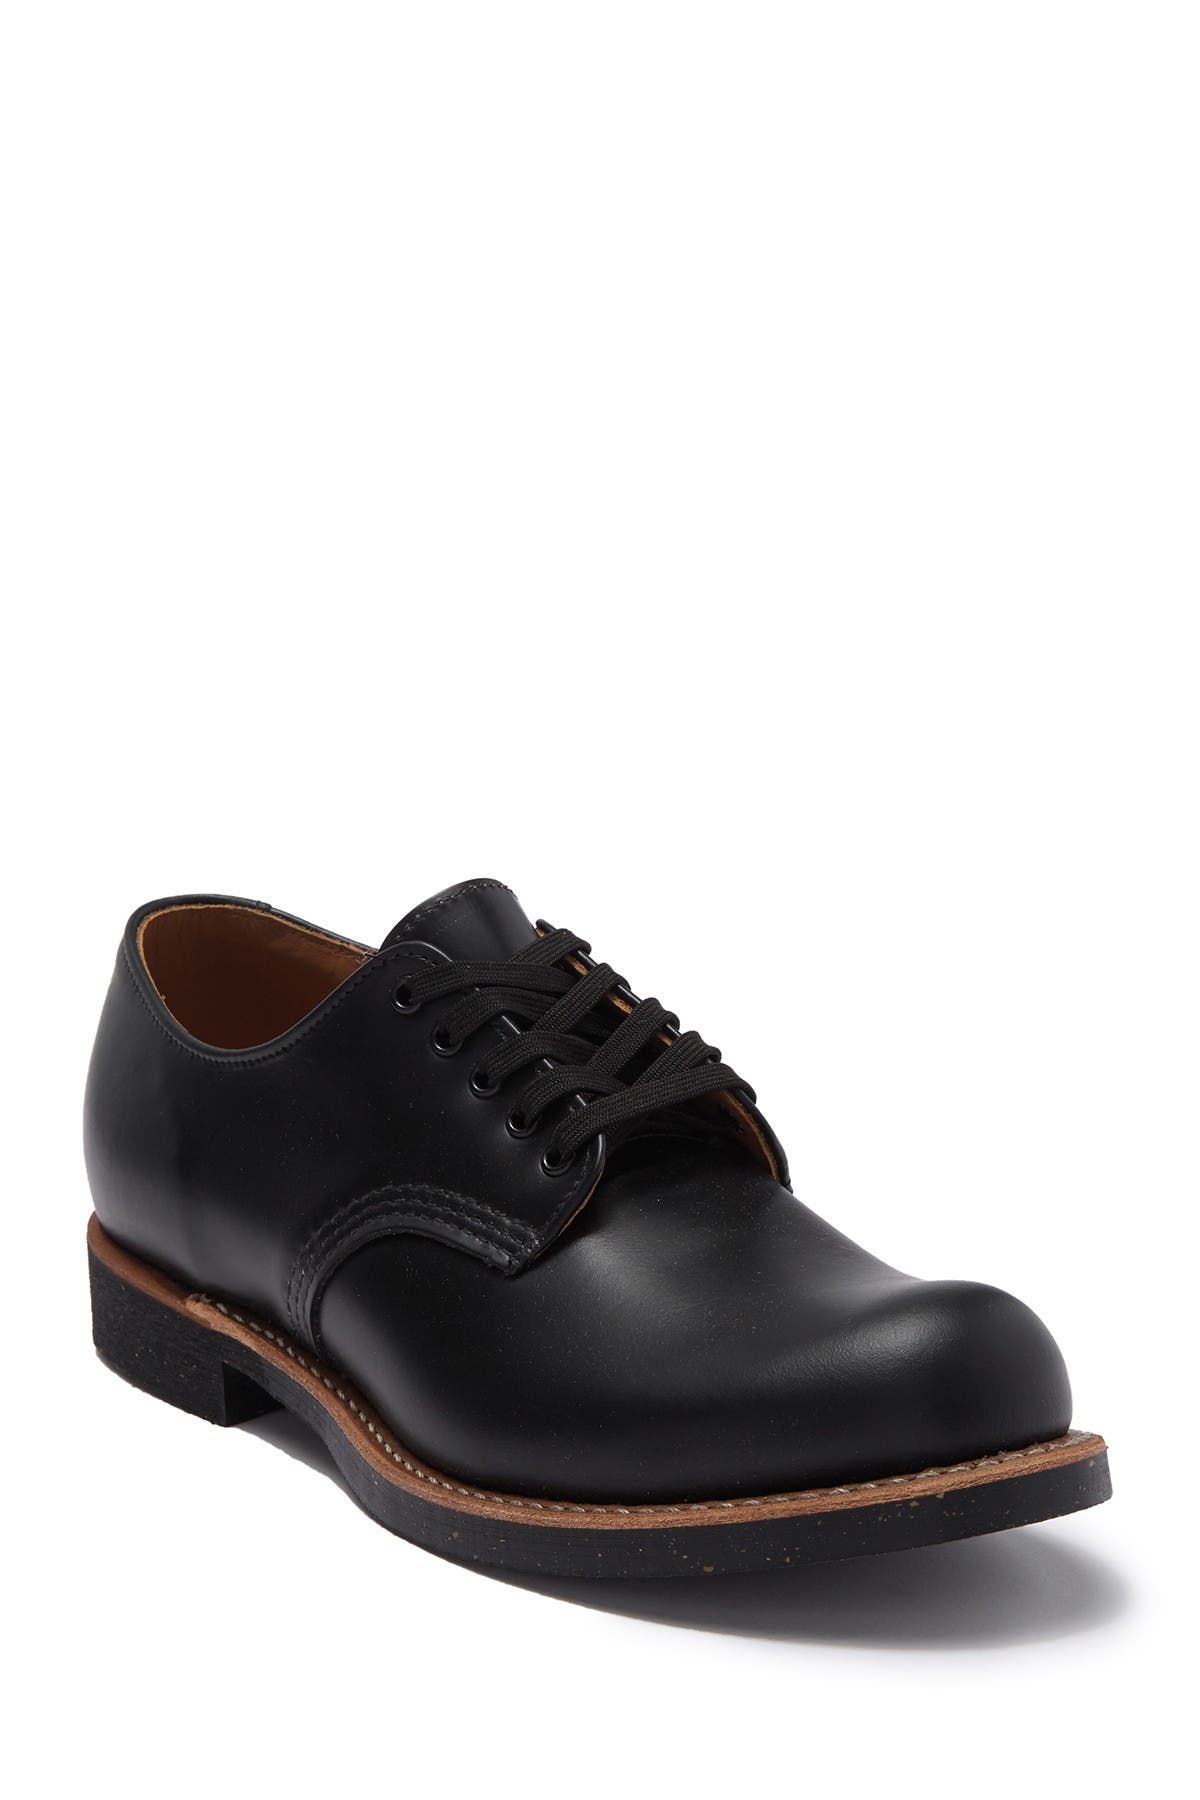 RED WING | Foreman Leather Oxford 